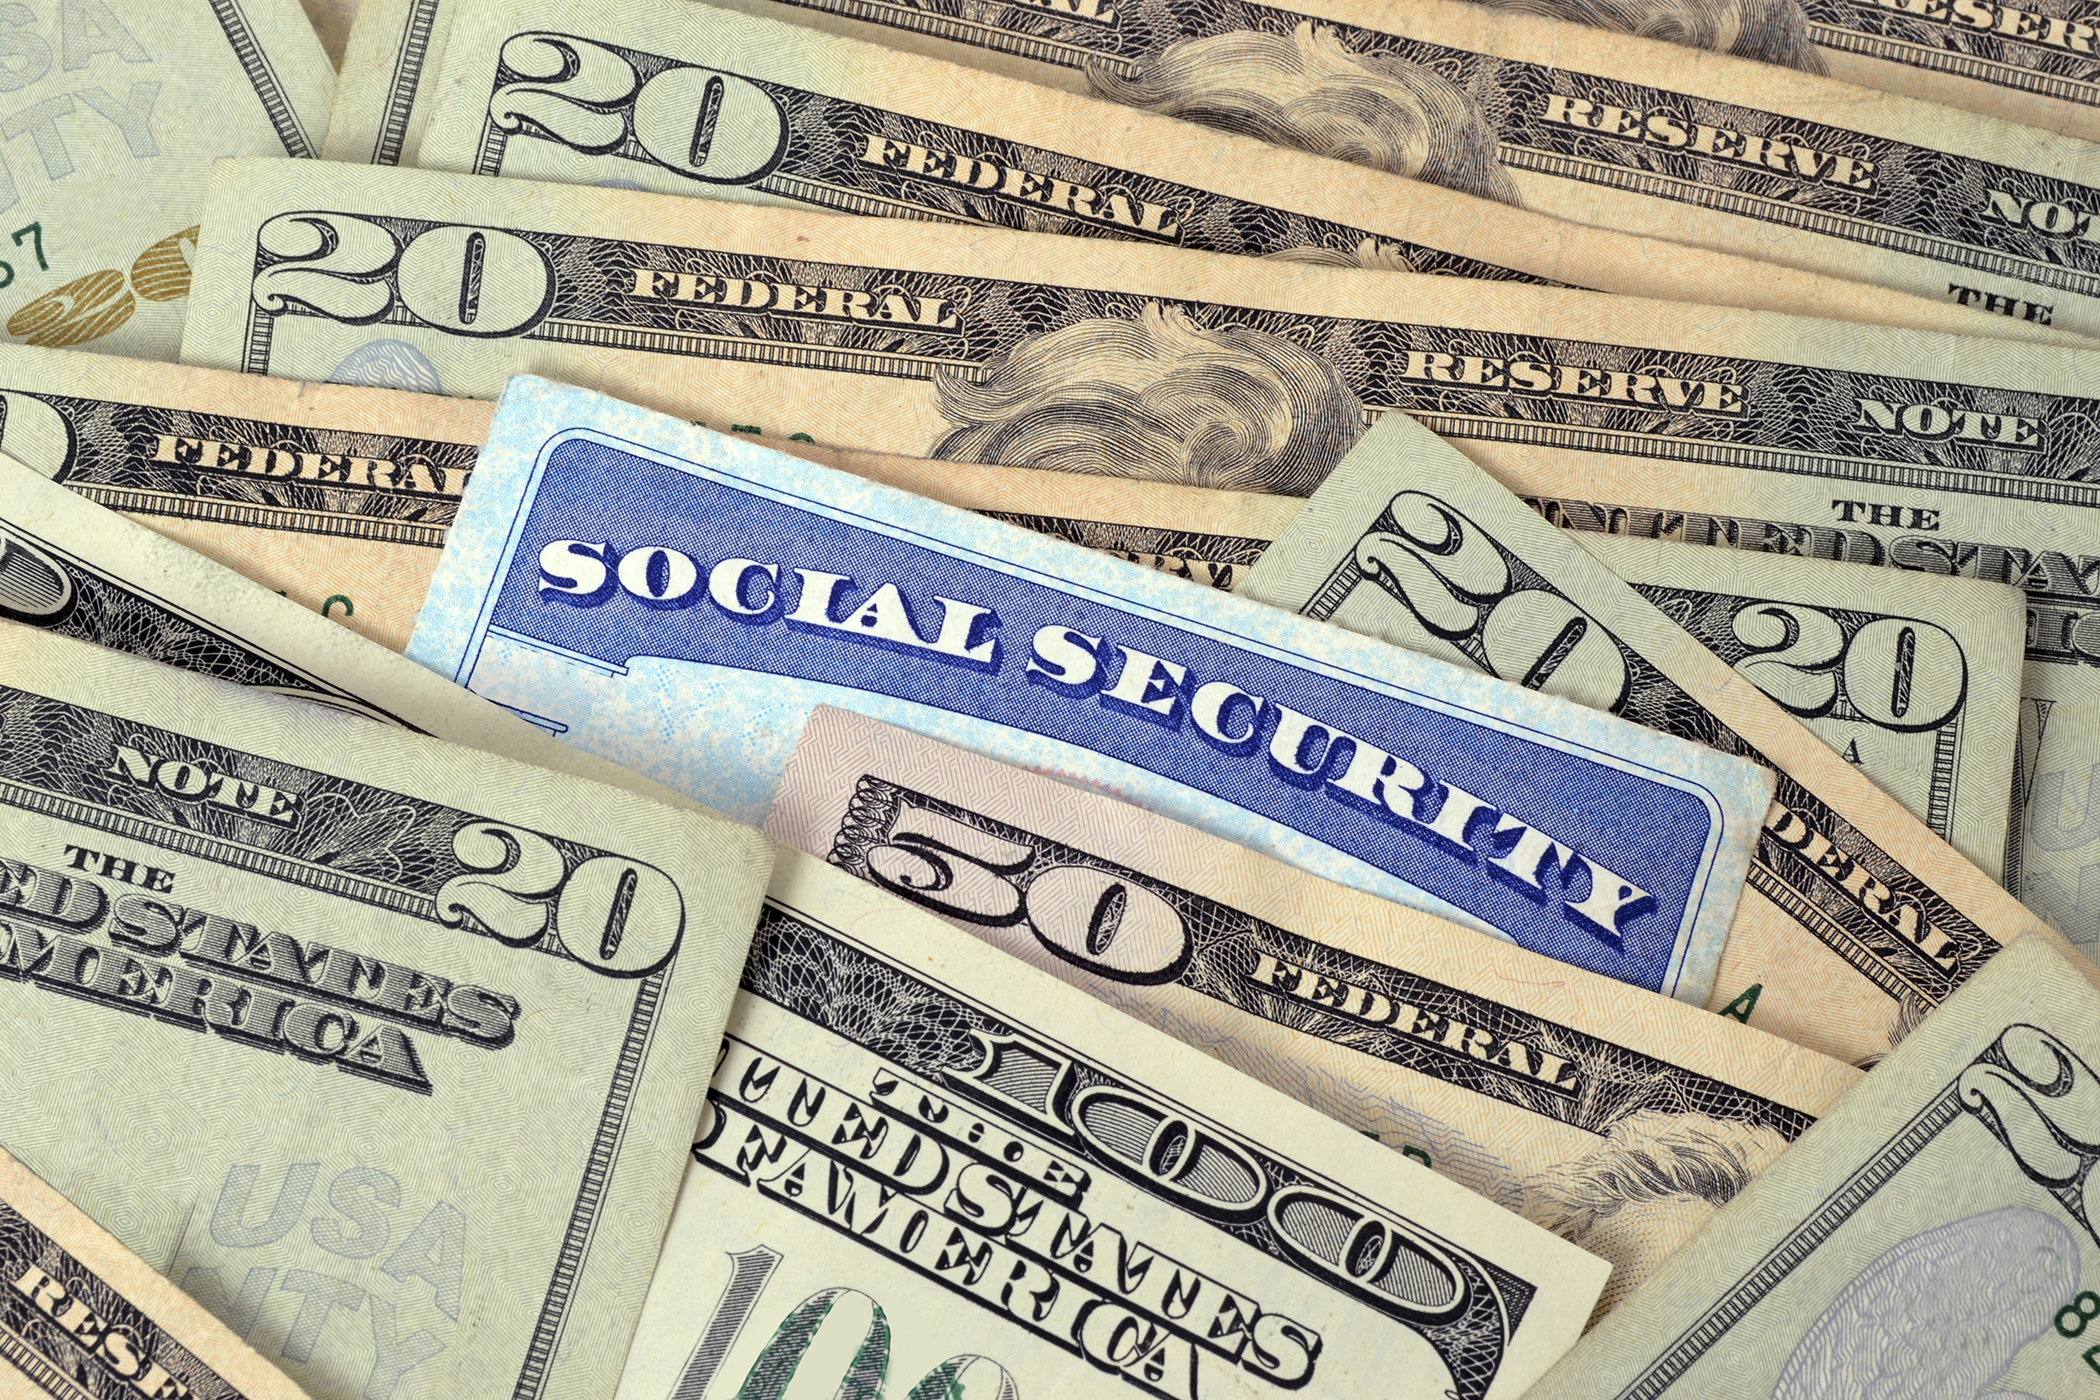 Social Security Benefits to Rise 0.3% in 2017